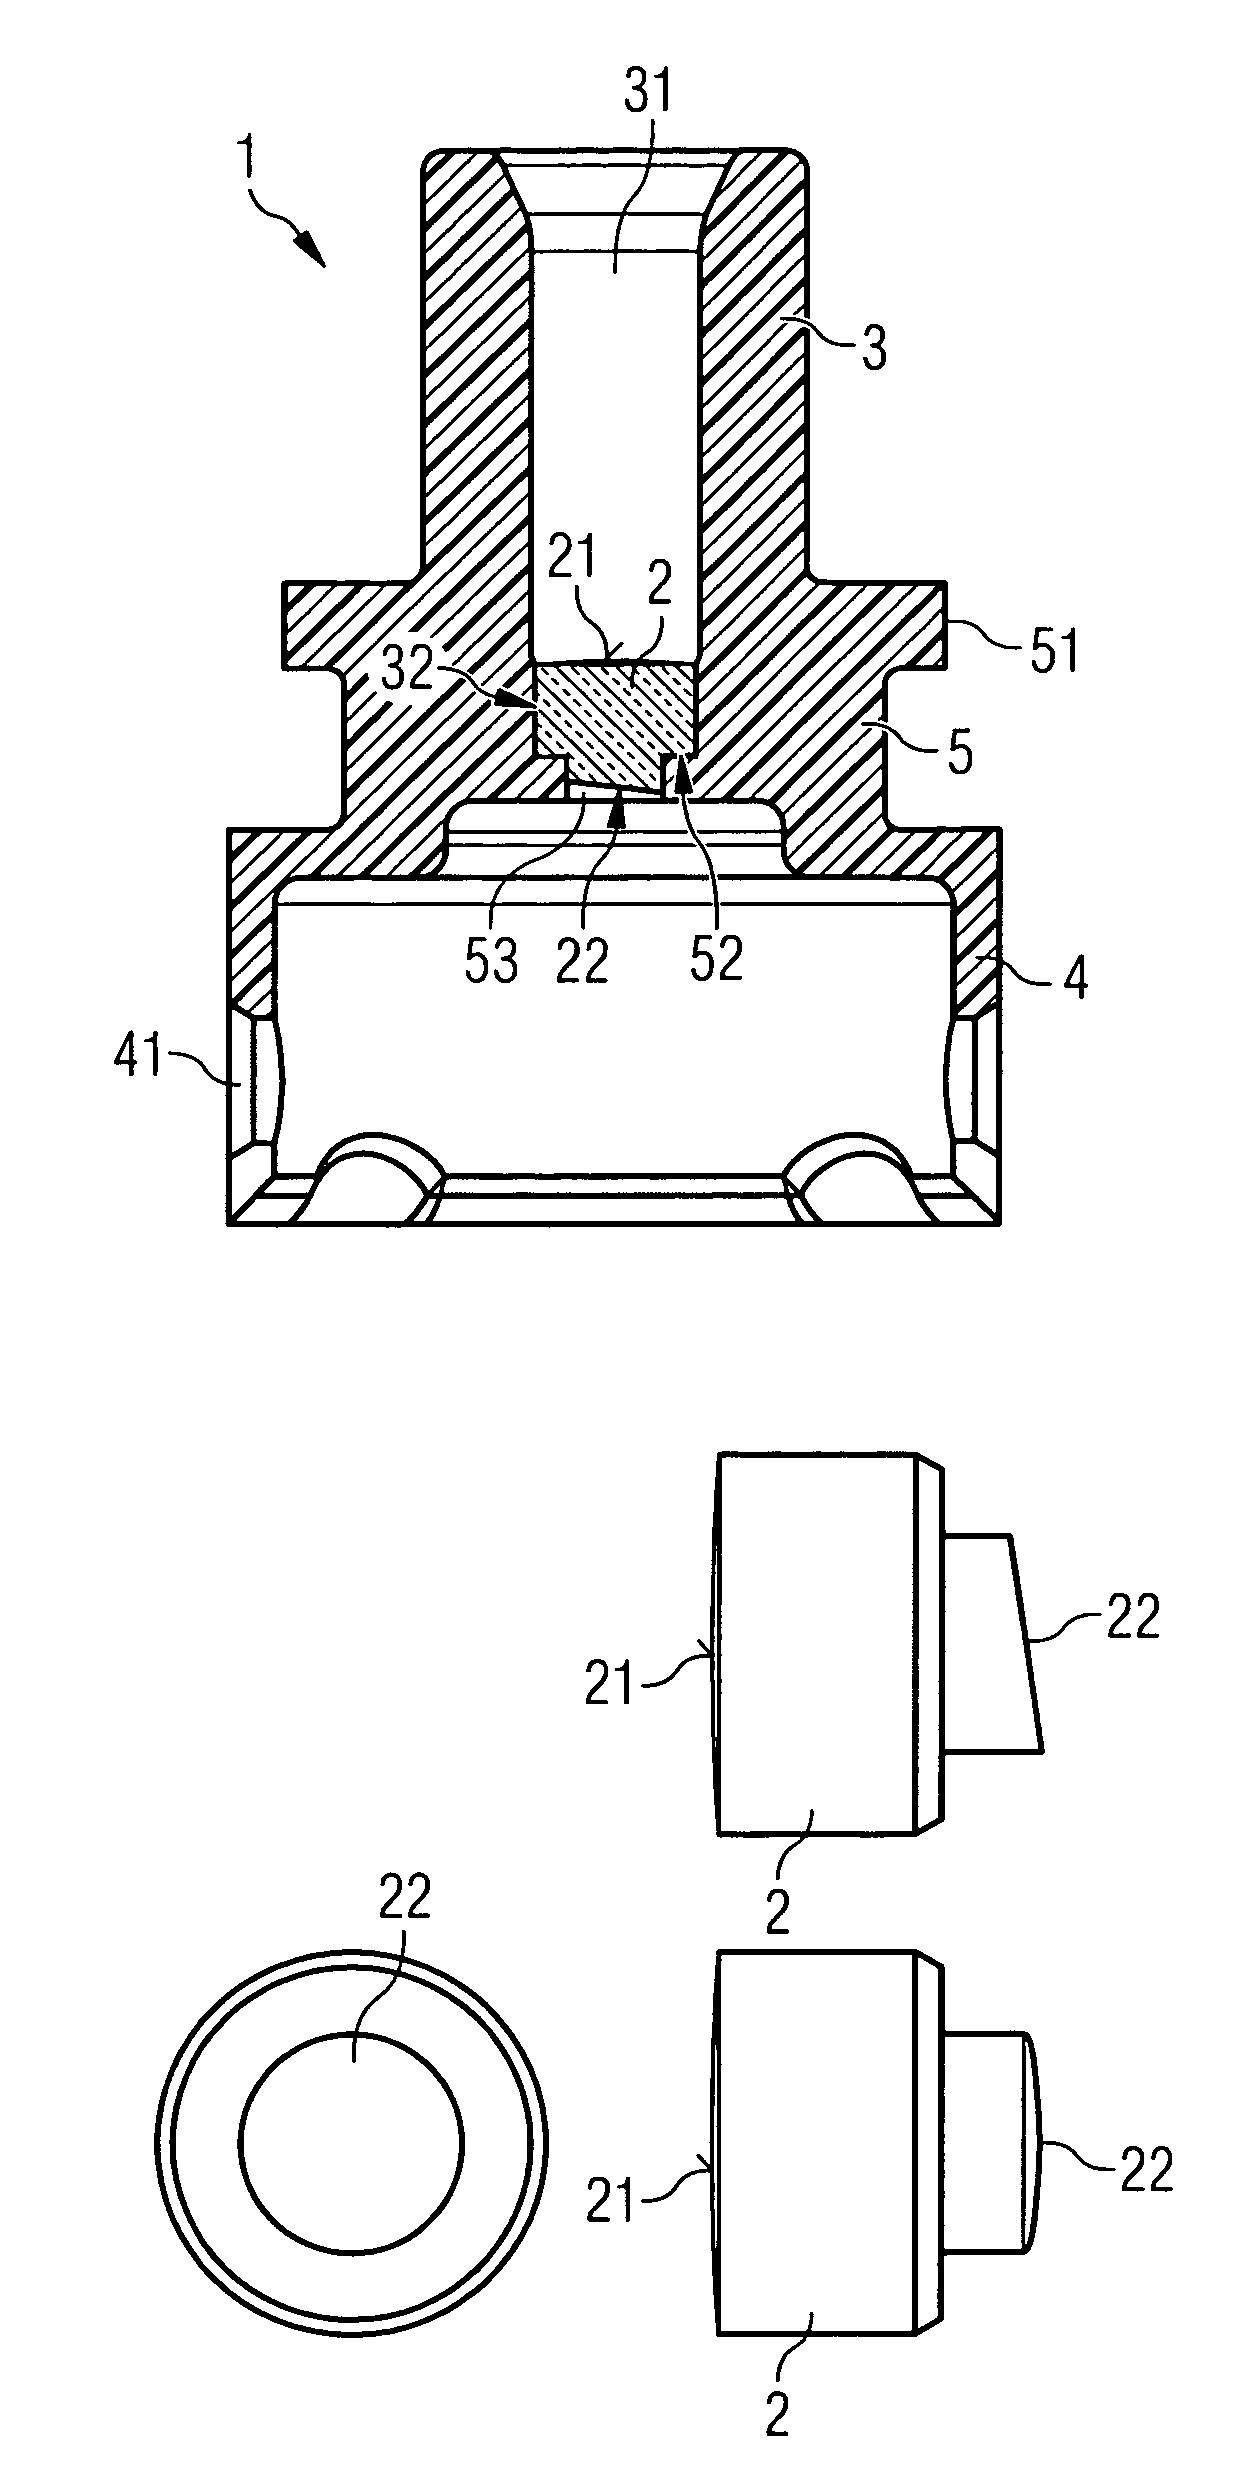 Coupling unit for coupling an optical transmitting and/or receiving module to an optical fiber connector